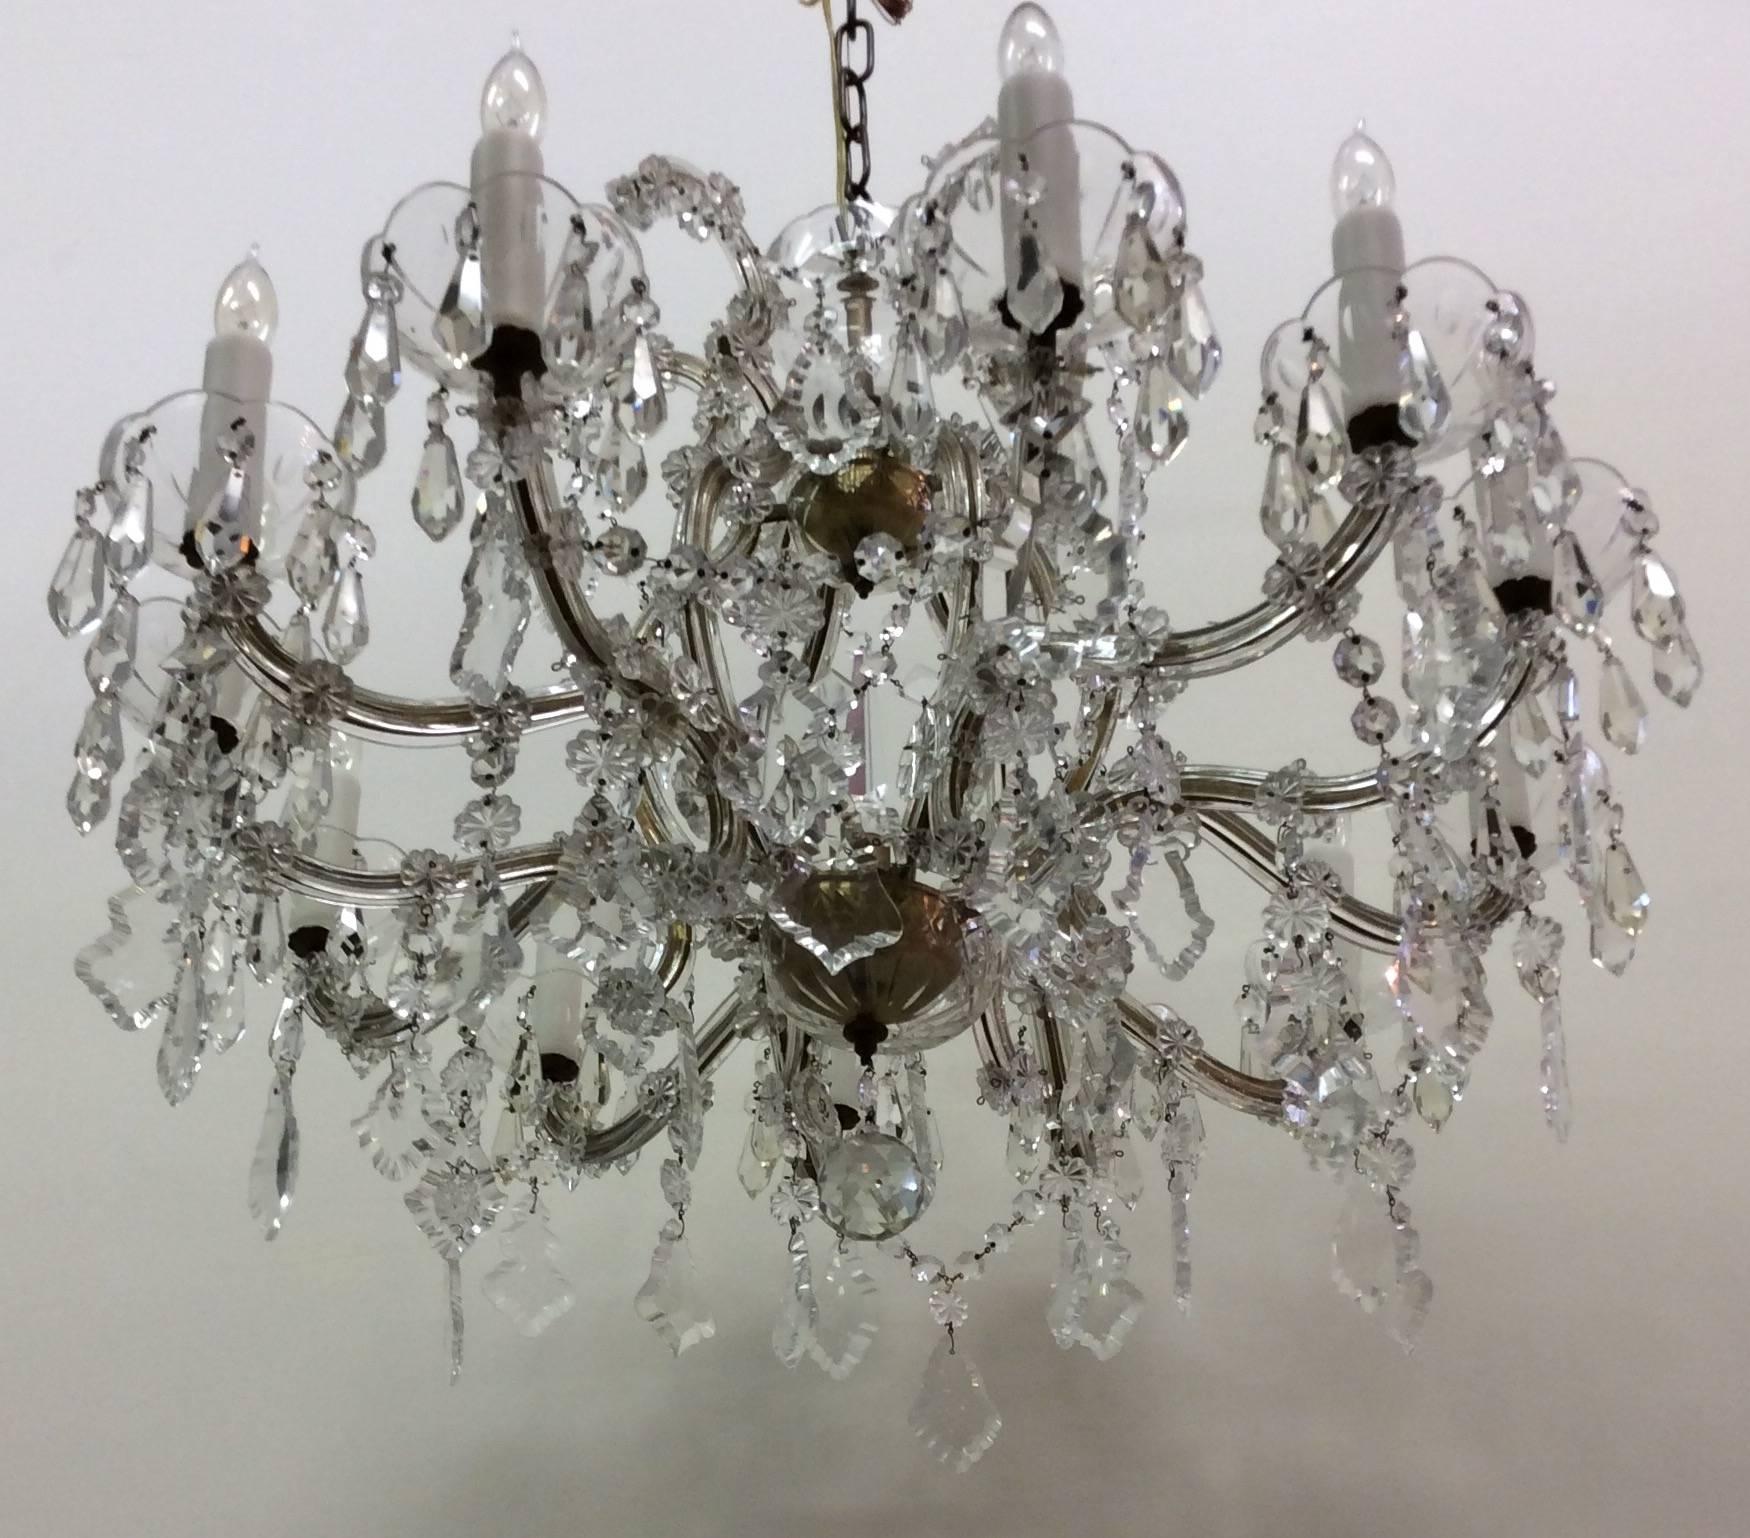 Maria Theresa crystal chandelier with twelve Lights, circa 1920. Excellent quality Czechoslovakian crystal prisms. Gold leaf iron frame. Restored and wired to UL standards. Measures 29 inches wide and 24 inches high.